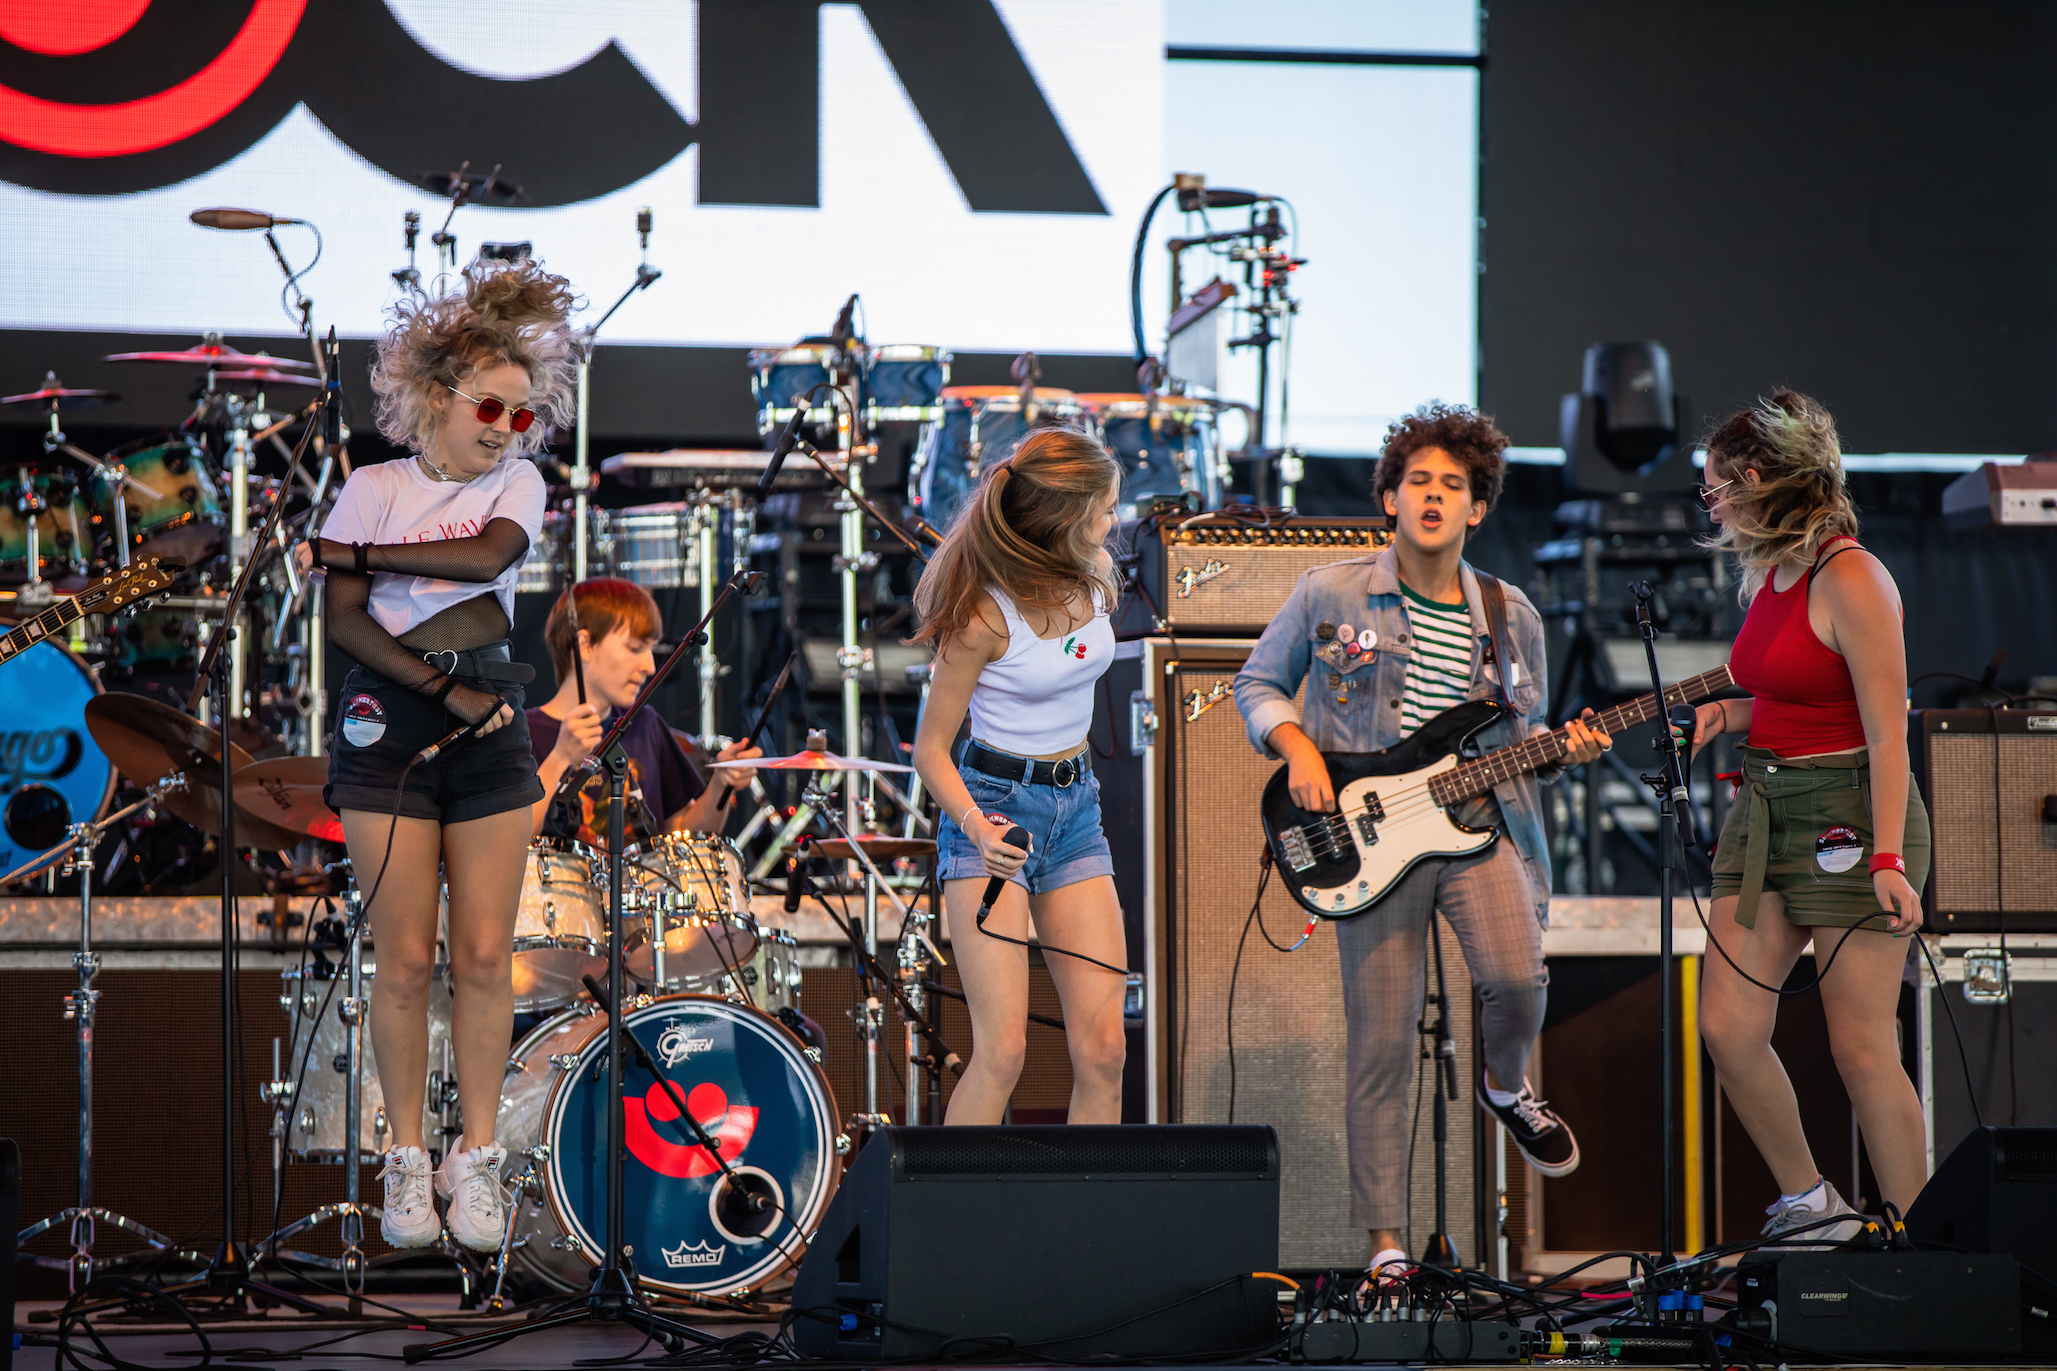 School of Rock students performing at Summerfest